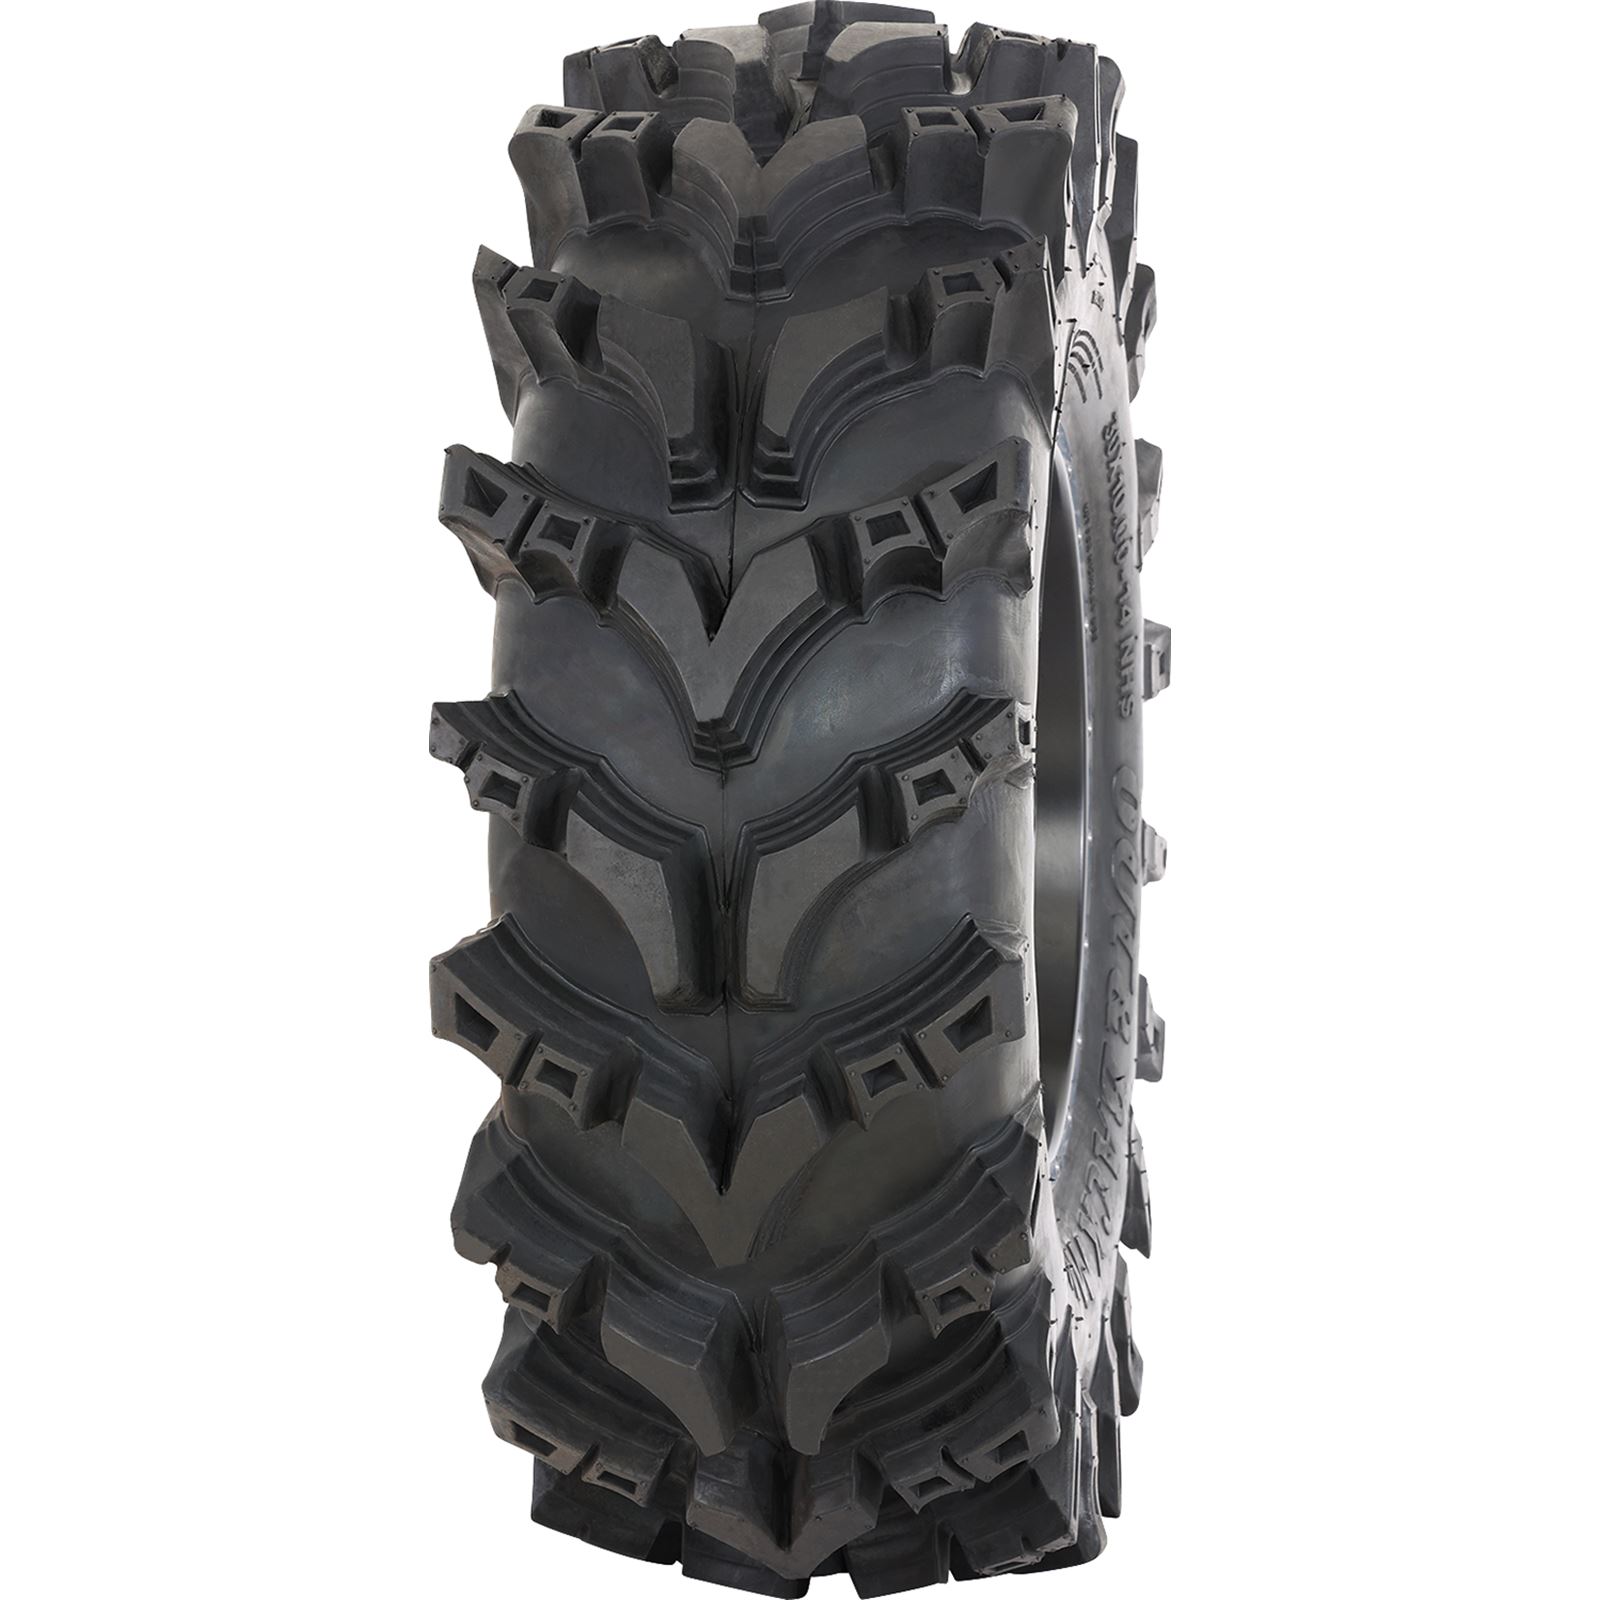 High Lifter Tire - Out&Back Max - Front/Rear - 28x10-14 - 8 Ply